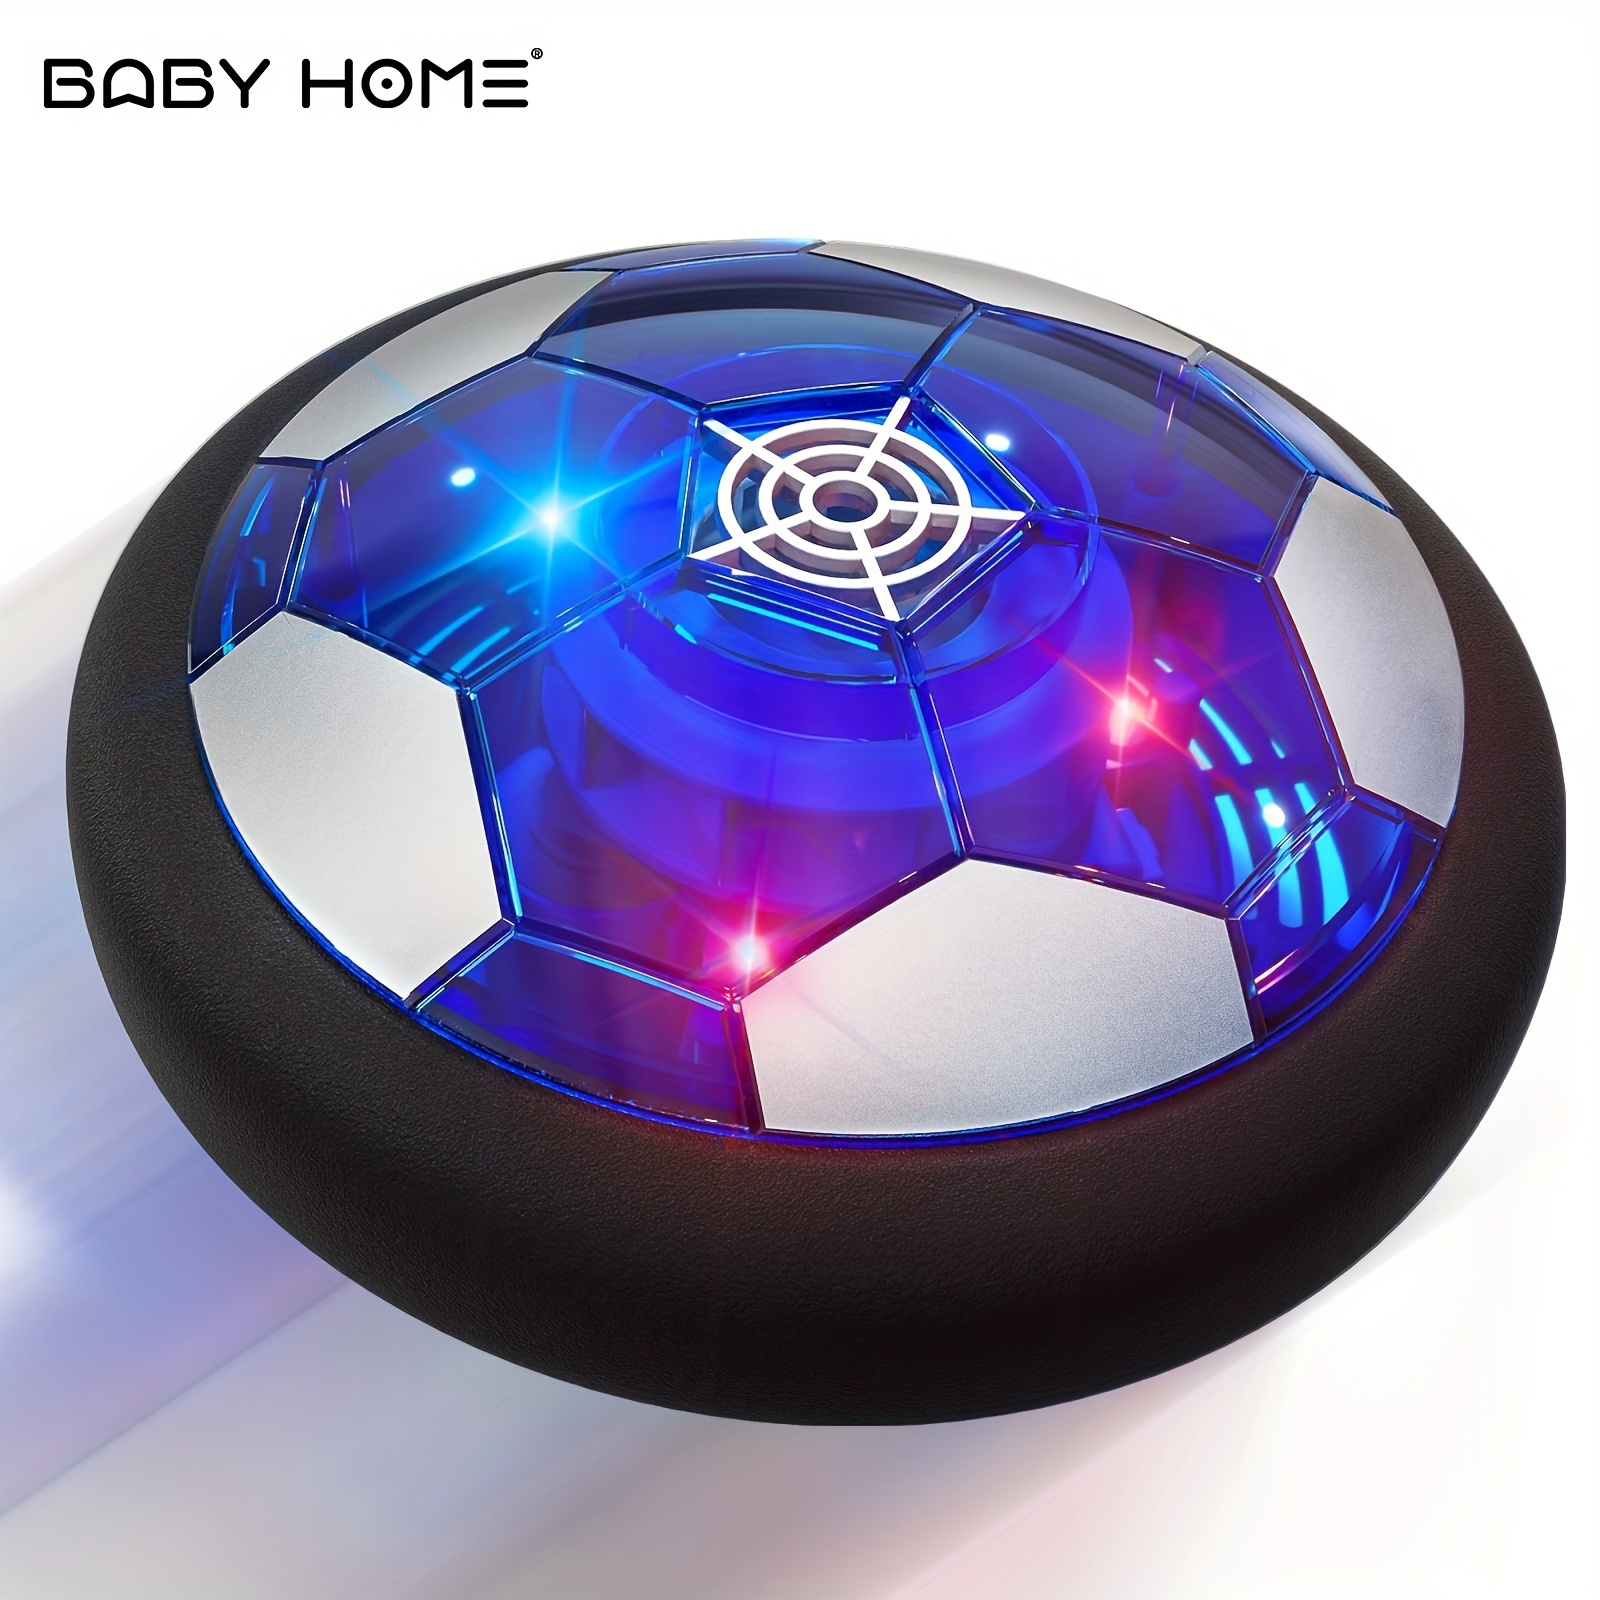 

Hover Soccer Ball For Boys & Girls, Rechargeable Air Floating Soccer Ball With Led Light And Foam Bumper, Soccer Gifts For Age 3 4 5 6 7 8-12 Year Old Kids Boys Girls